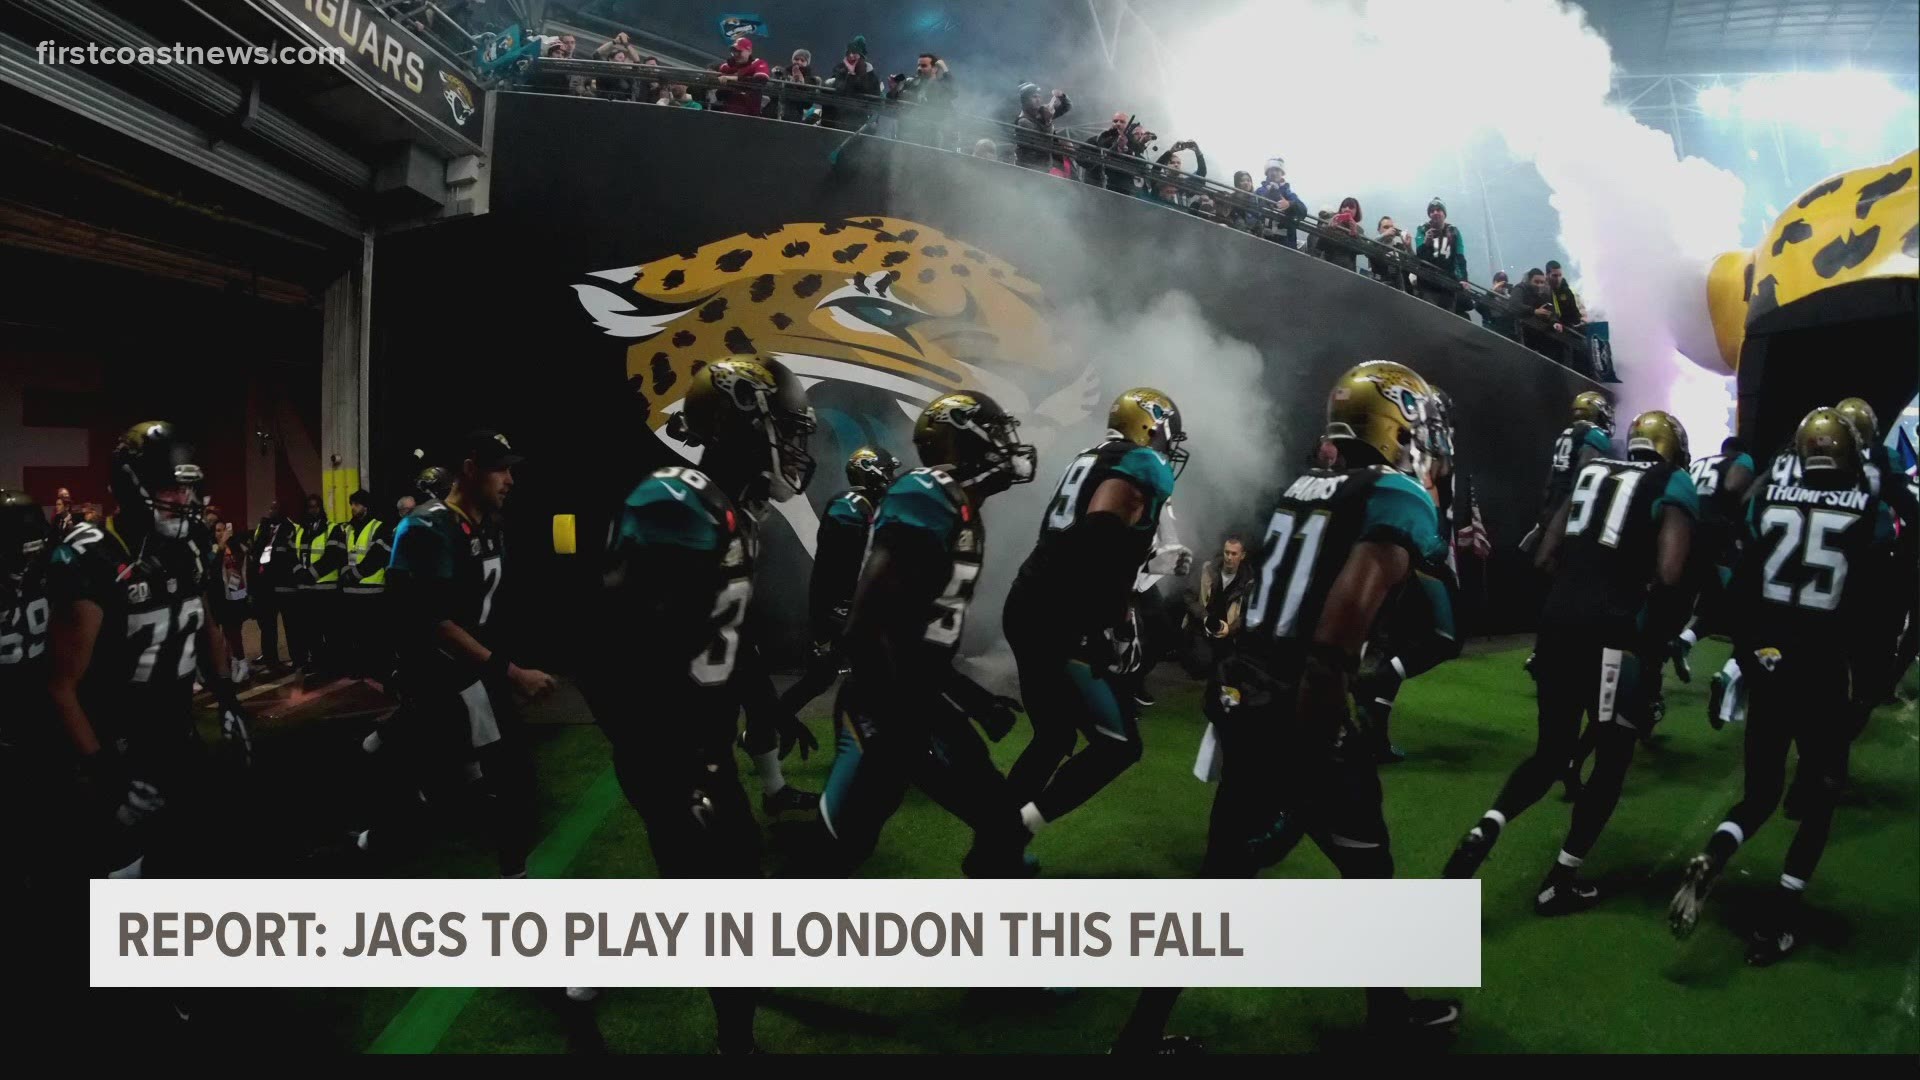 The Jaguars are expected to play in London this fall.